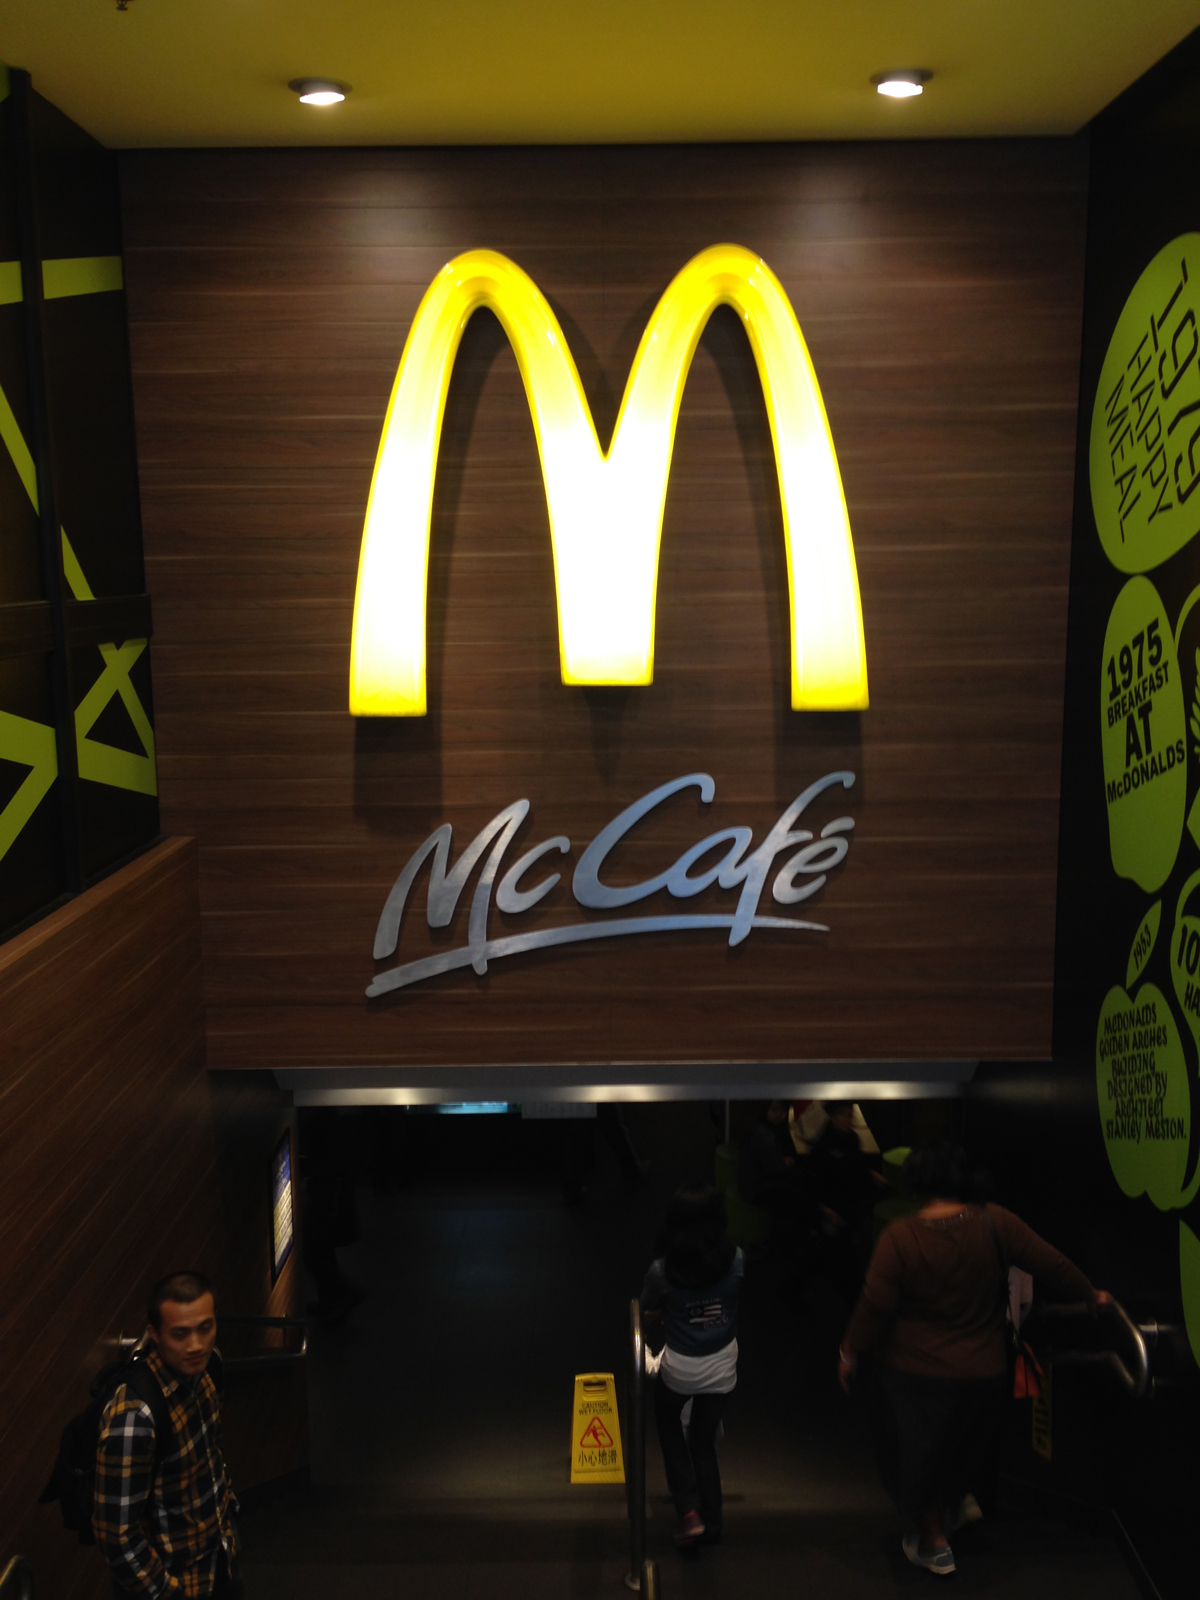 Though it might seem odd that I have McDonald featured here, I wanted to comment on how McCafe's are actually really popular in Hong Kong and about as prevalent around the city as you would expect a Starbucks to be in a city in the US.